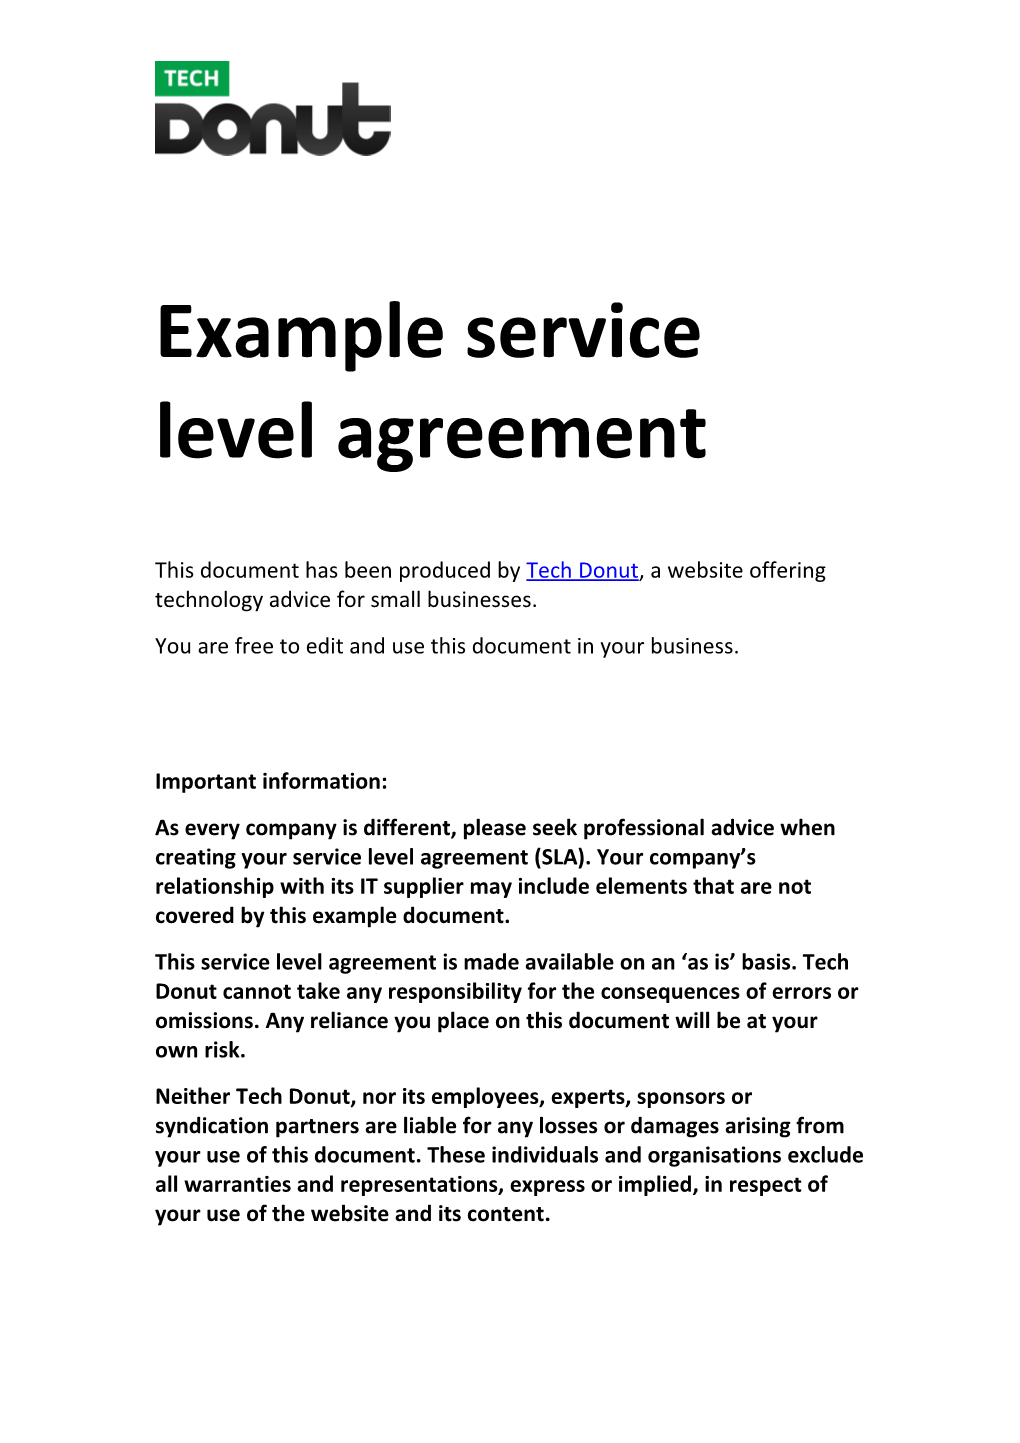 Example Service Level Agreement